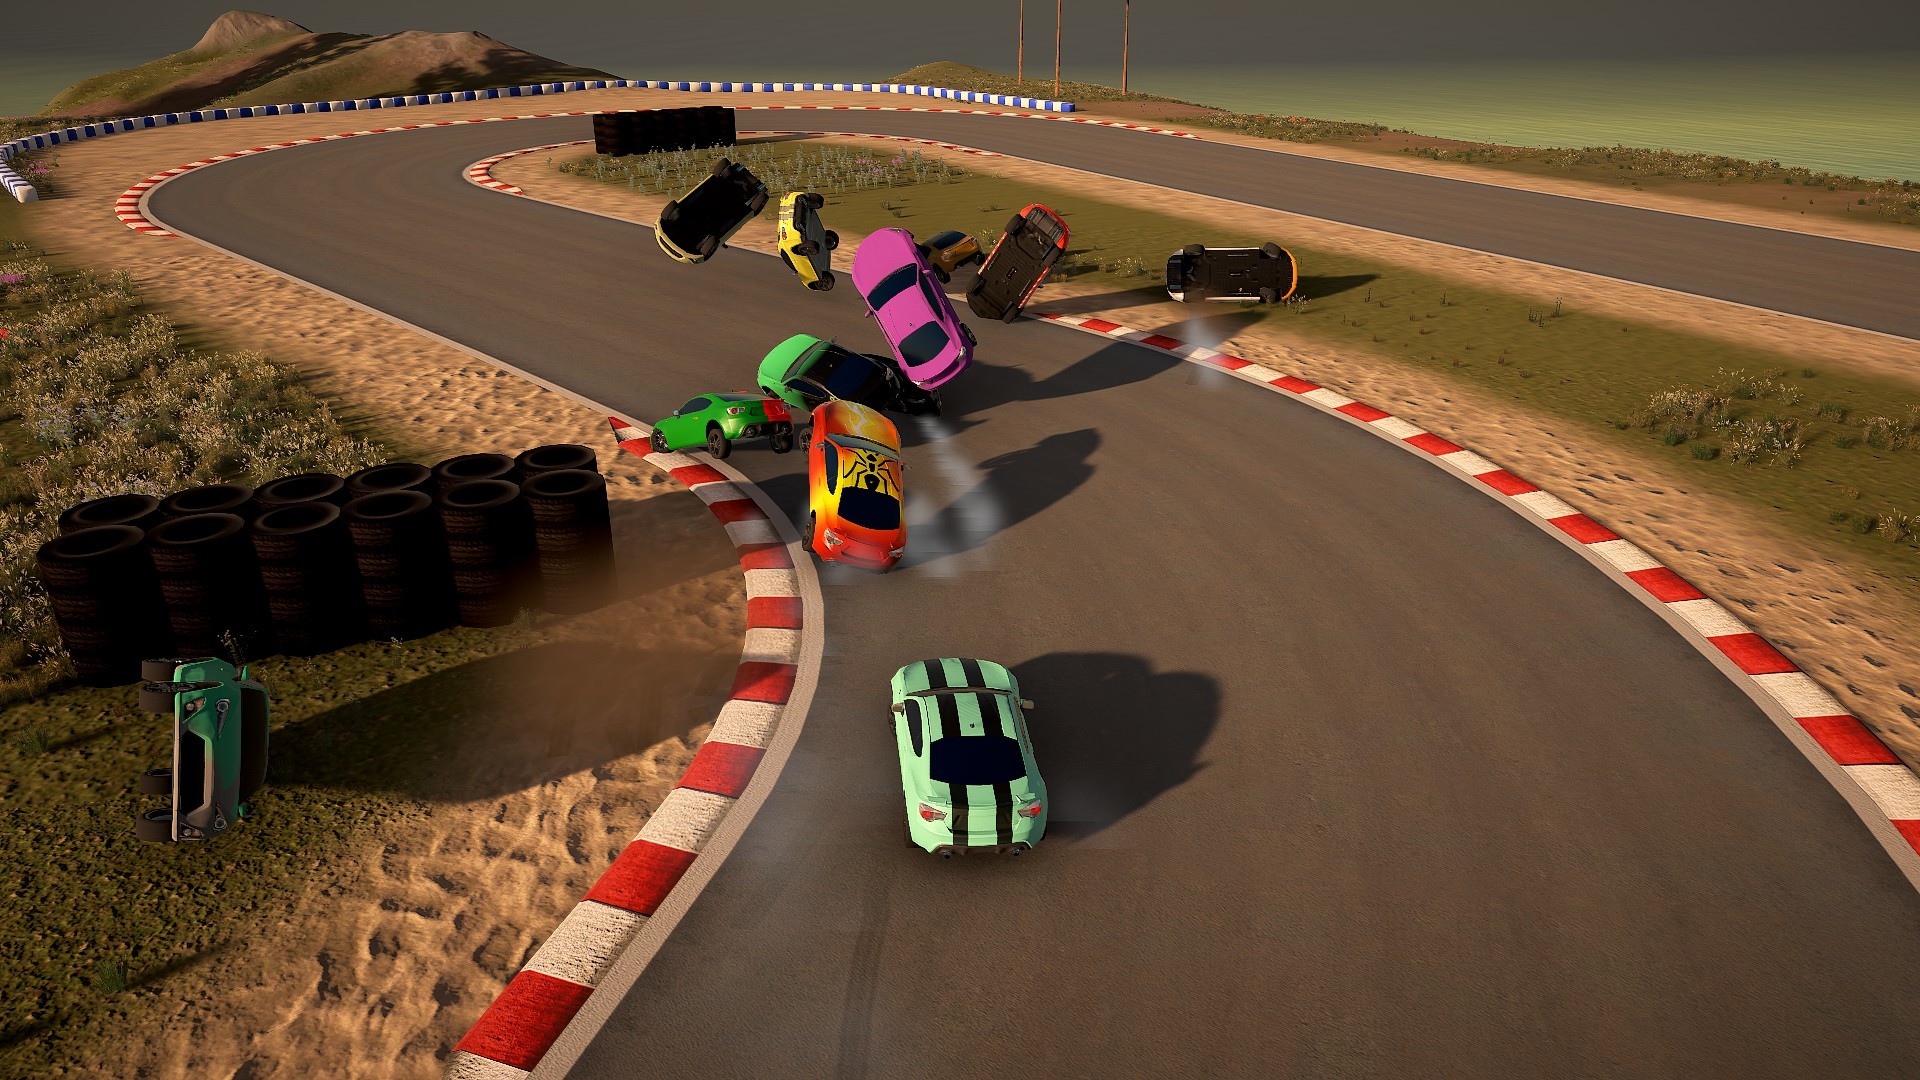 Another new online game mode in Turbo Sliders Unlimited: Capture